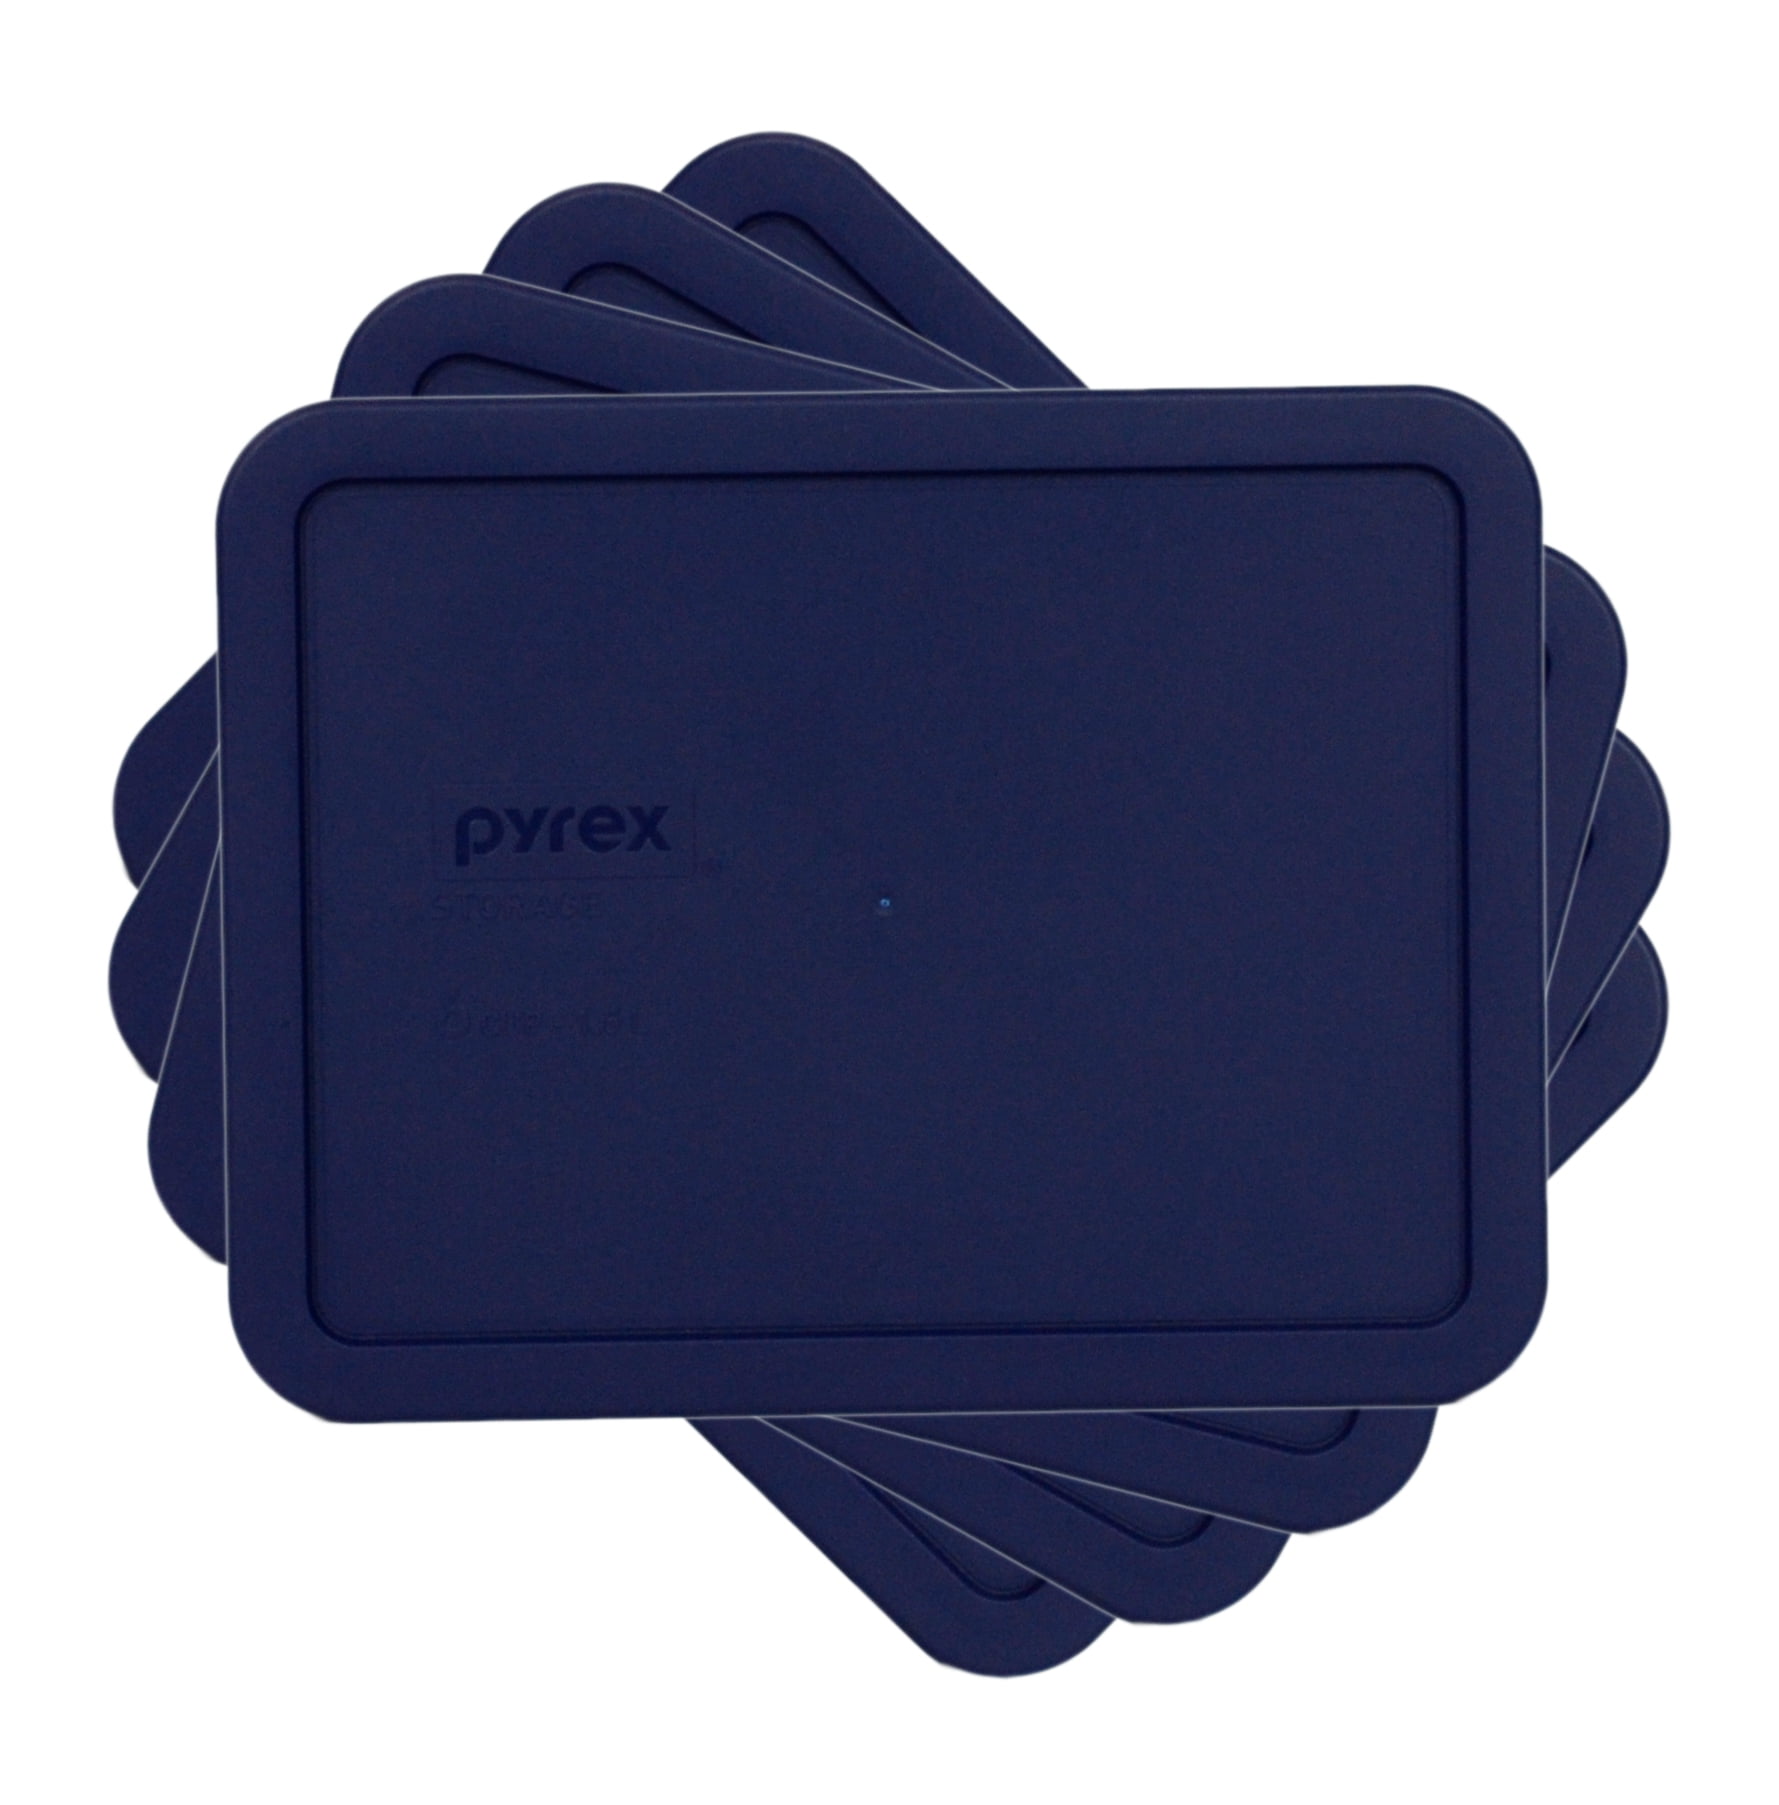 Pyrex 6-cup 7211 Rectangle Glass Food Storage Containers with Blue Plastic  Lids - 4 Pack Made in the USA